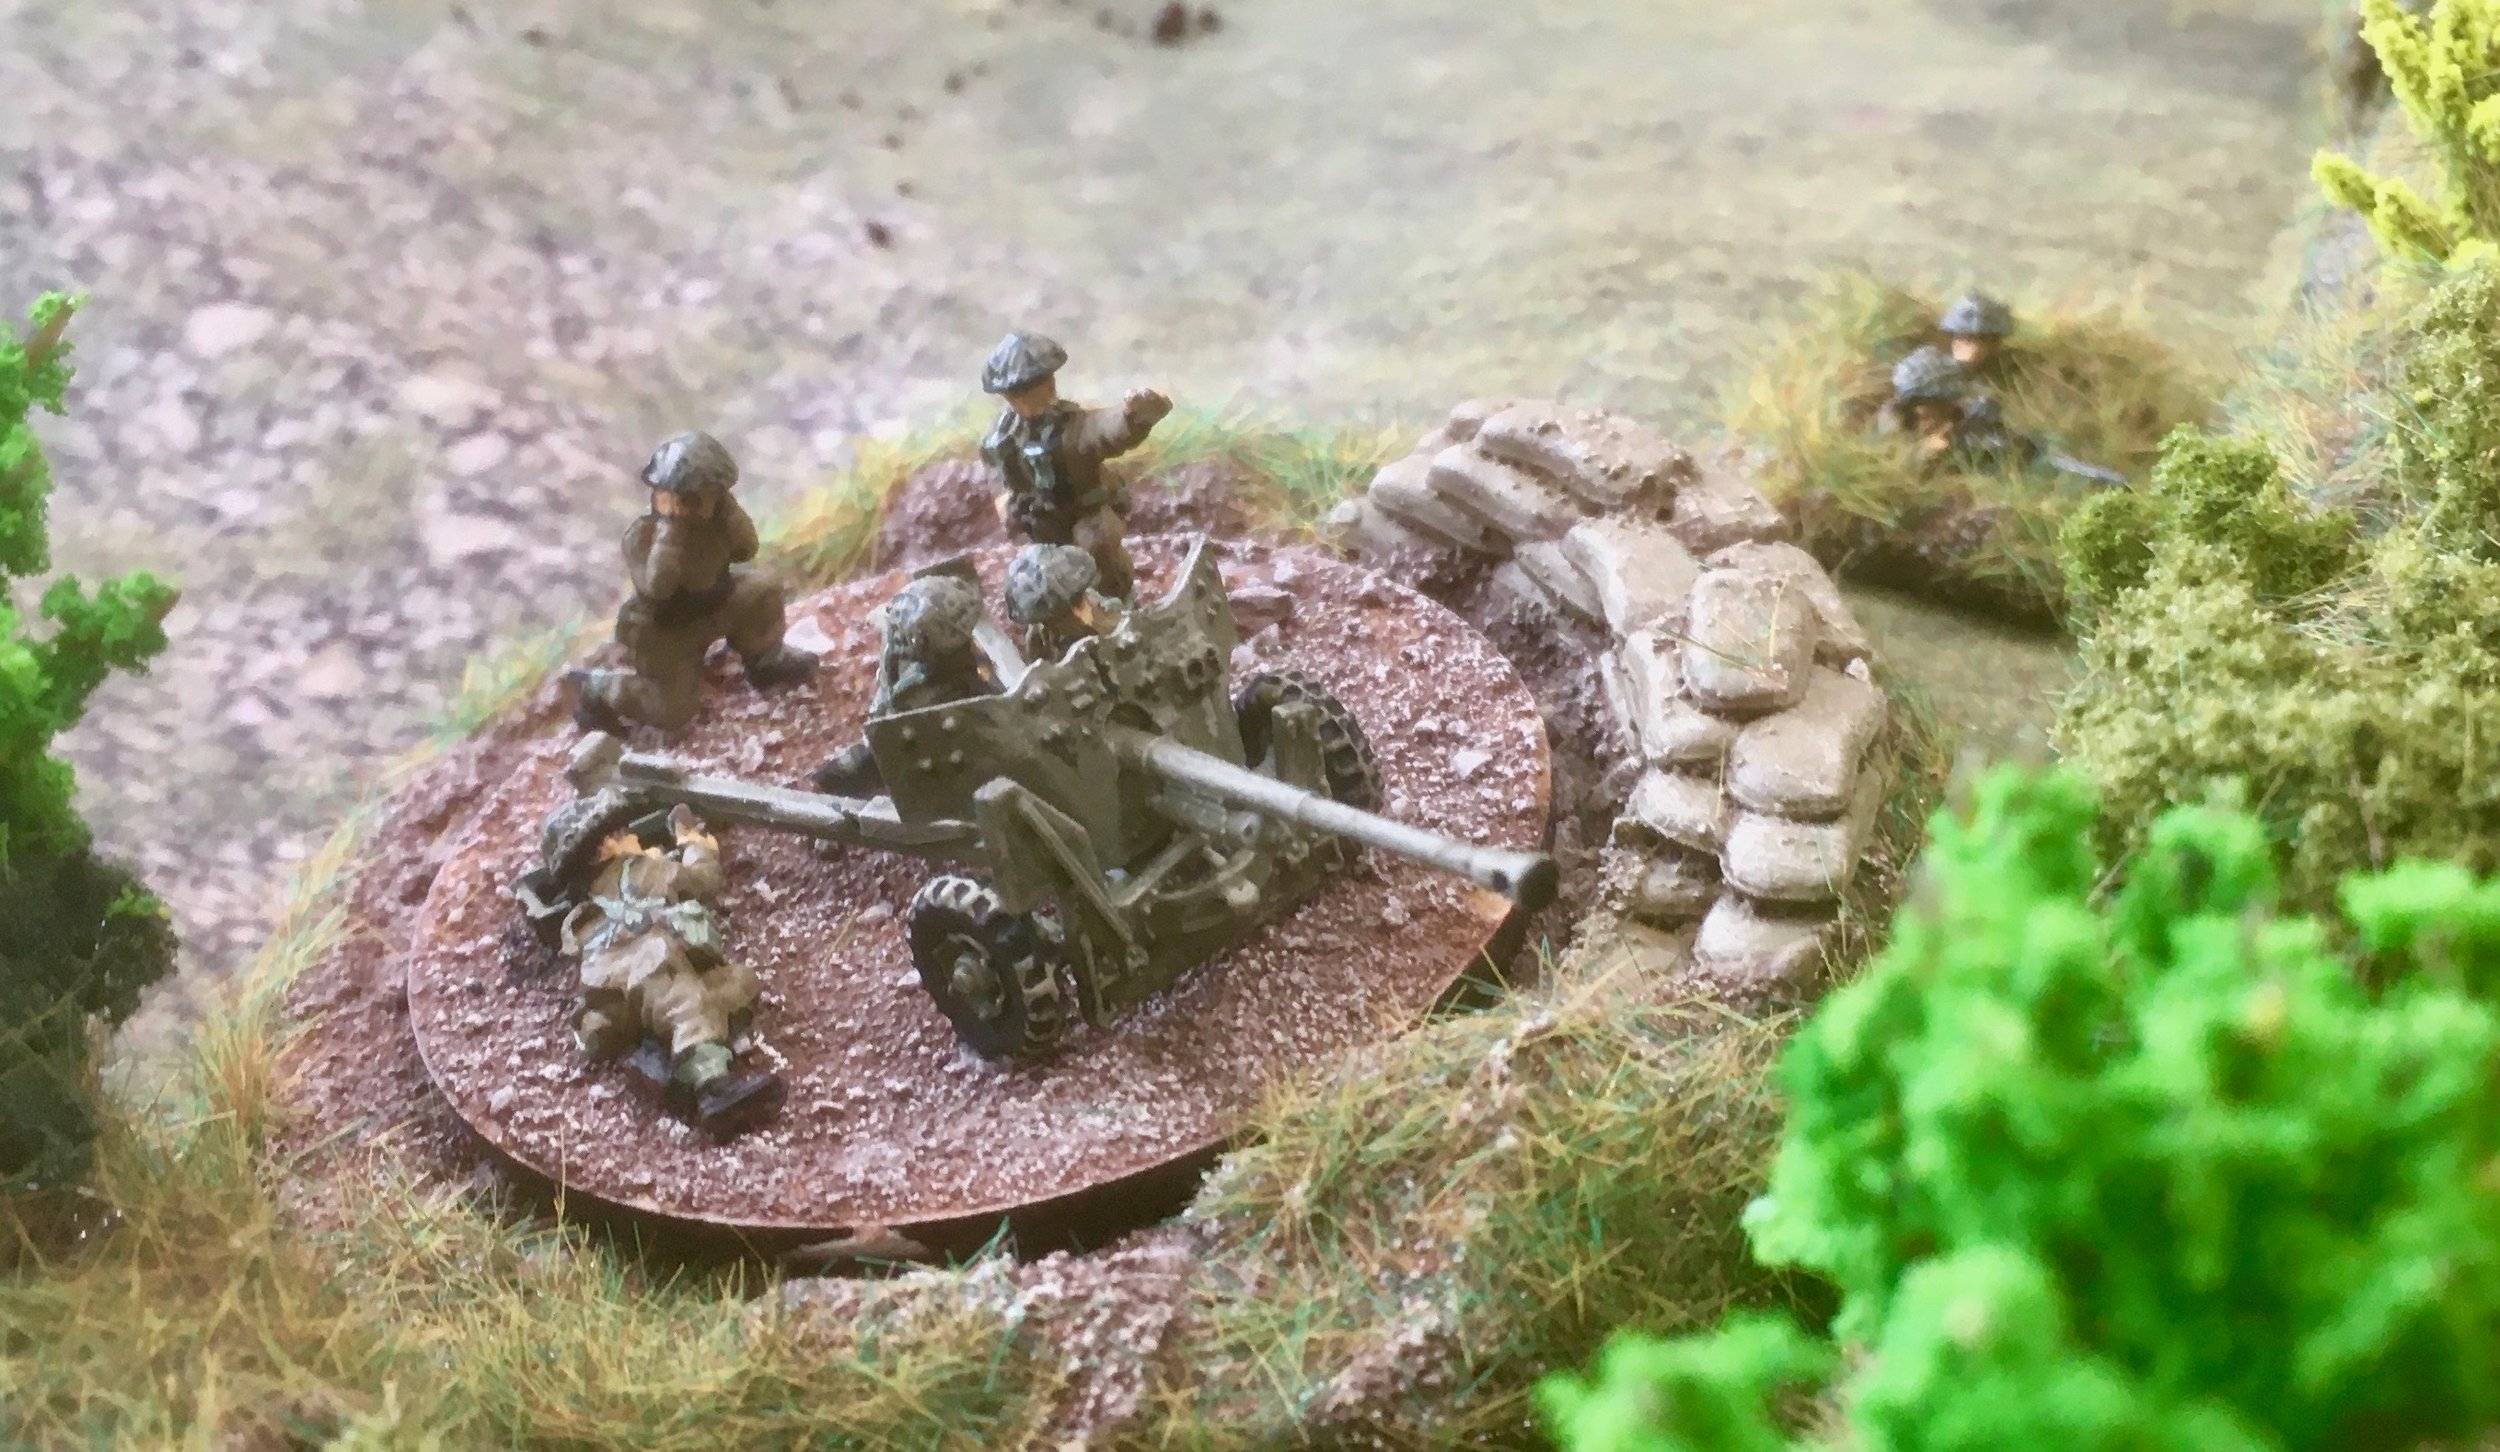 Andy then revealed one of his blinds and deployed a 6-pounder anti-tank gun!